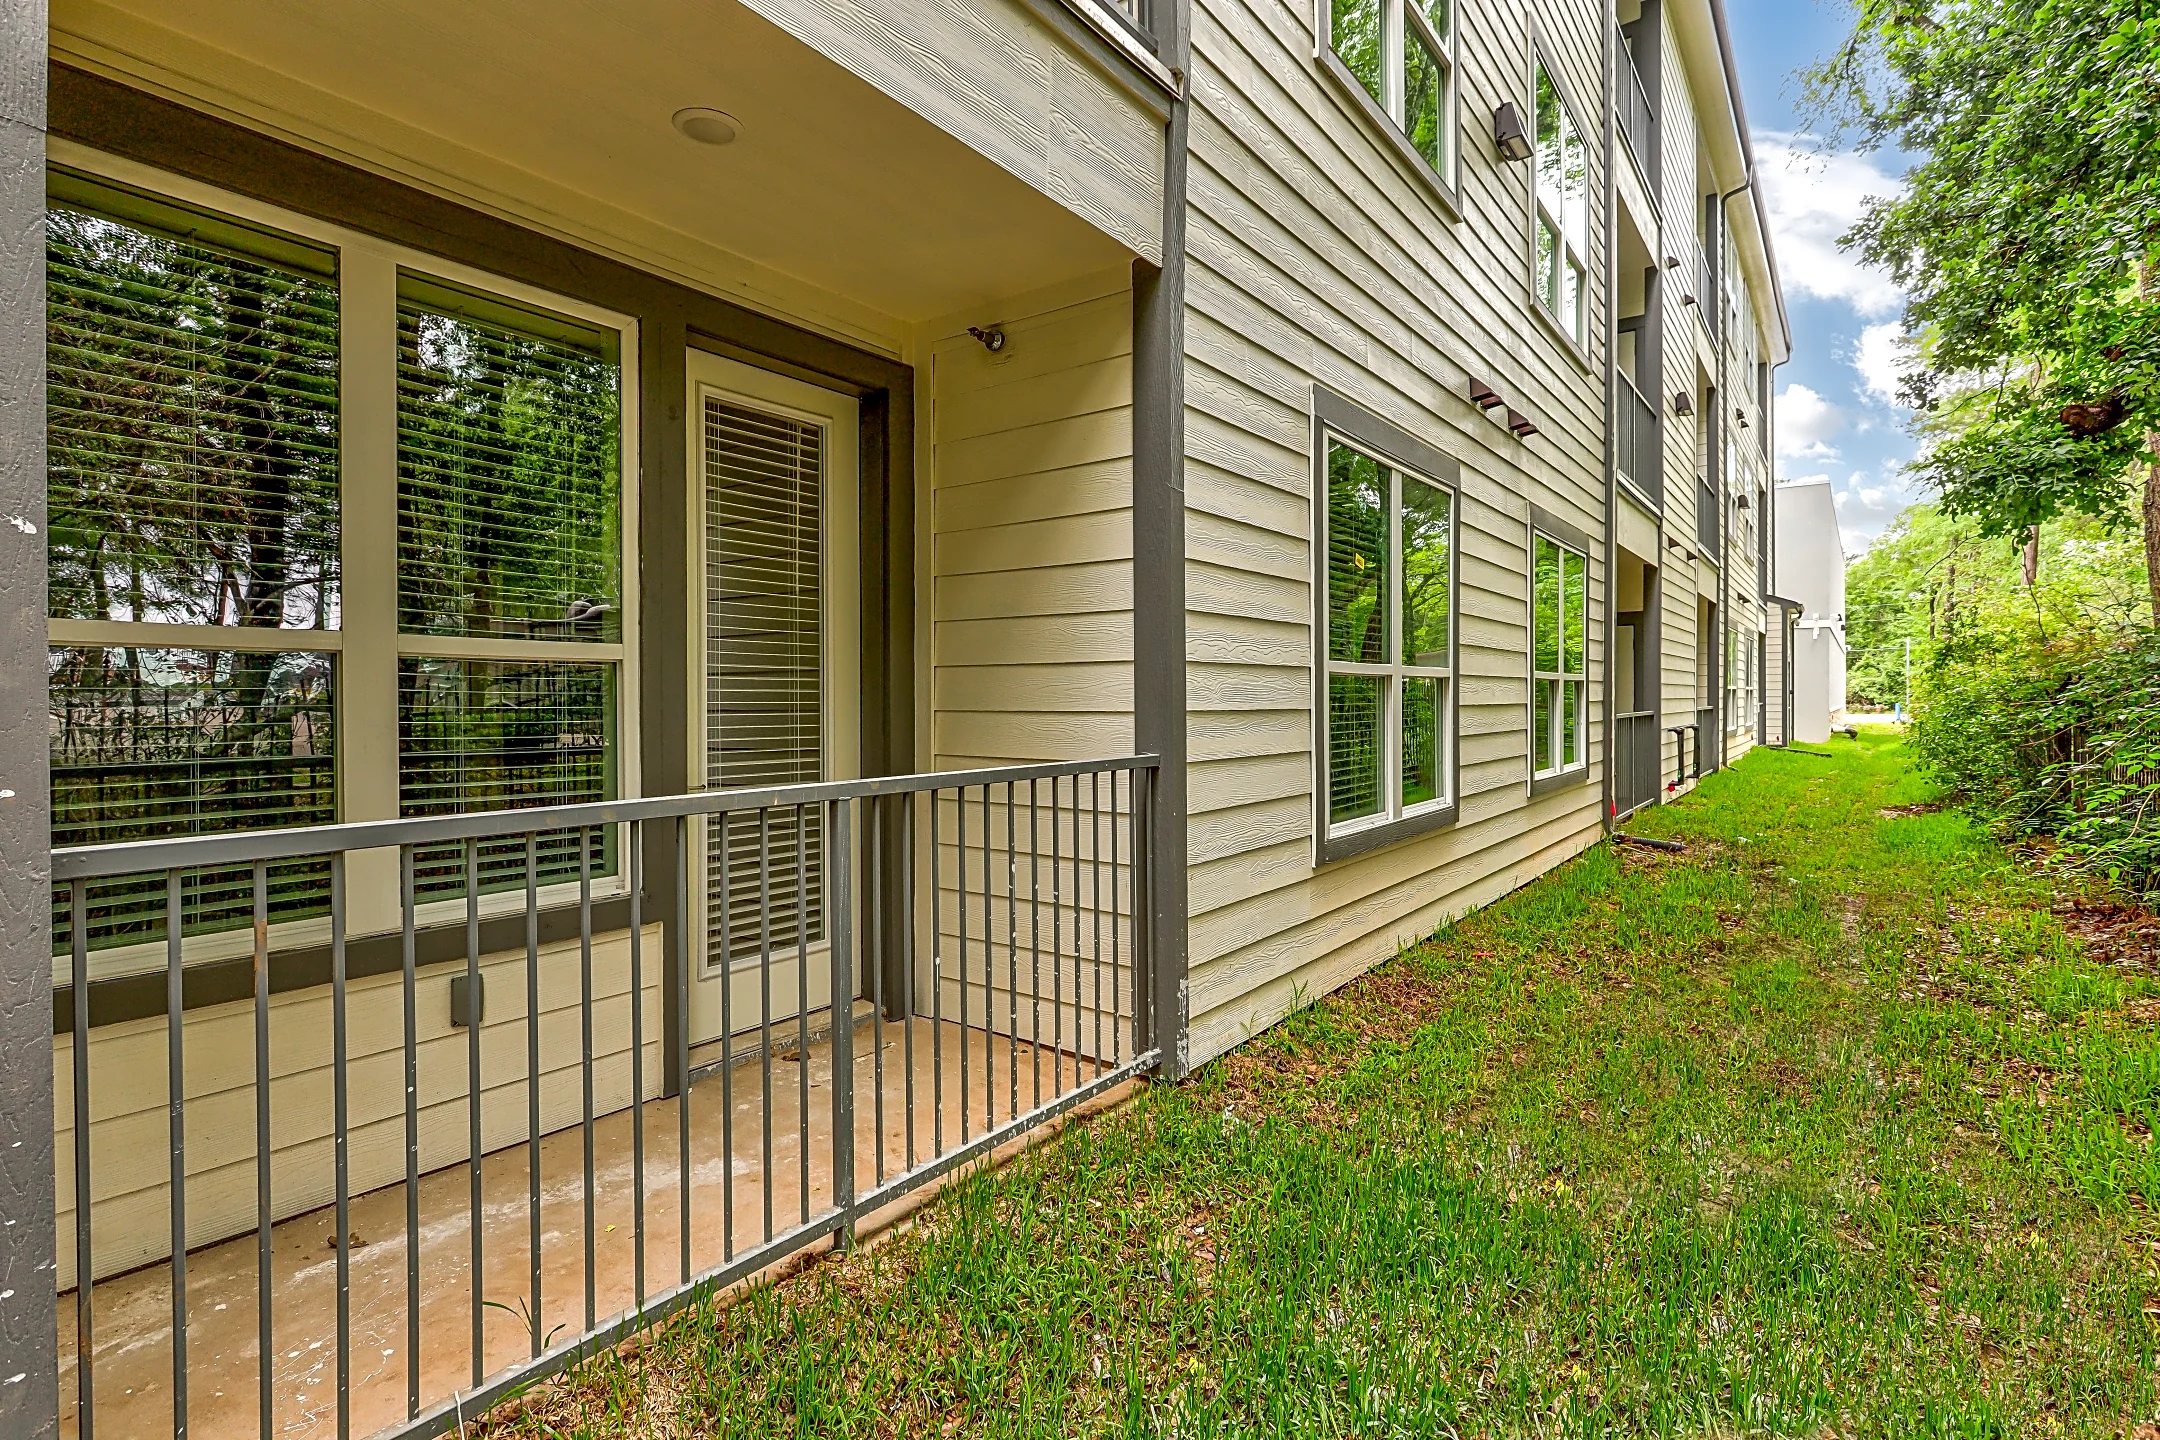 Building - Azul Apartments - The Woodlands - Spring, TX